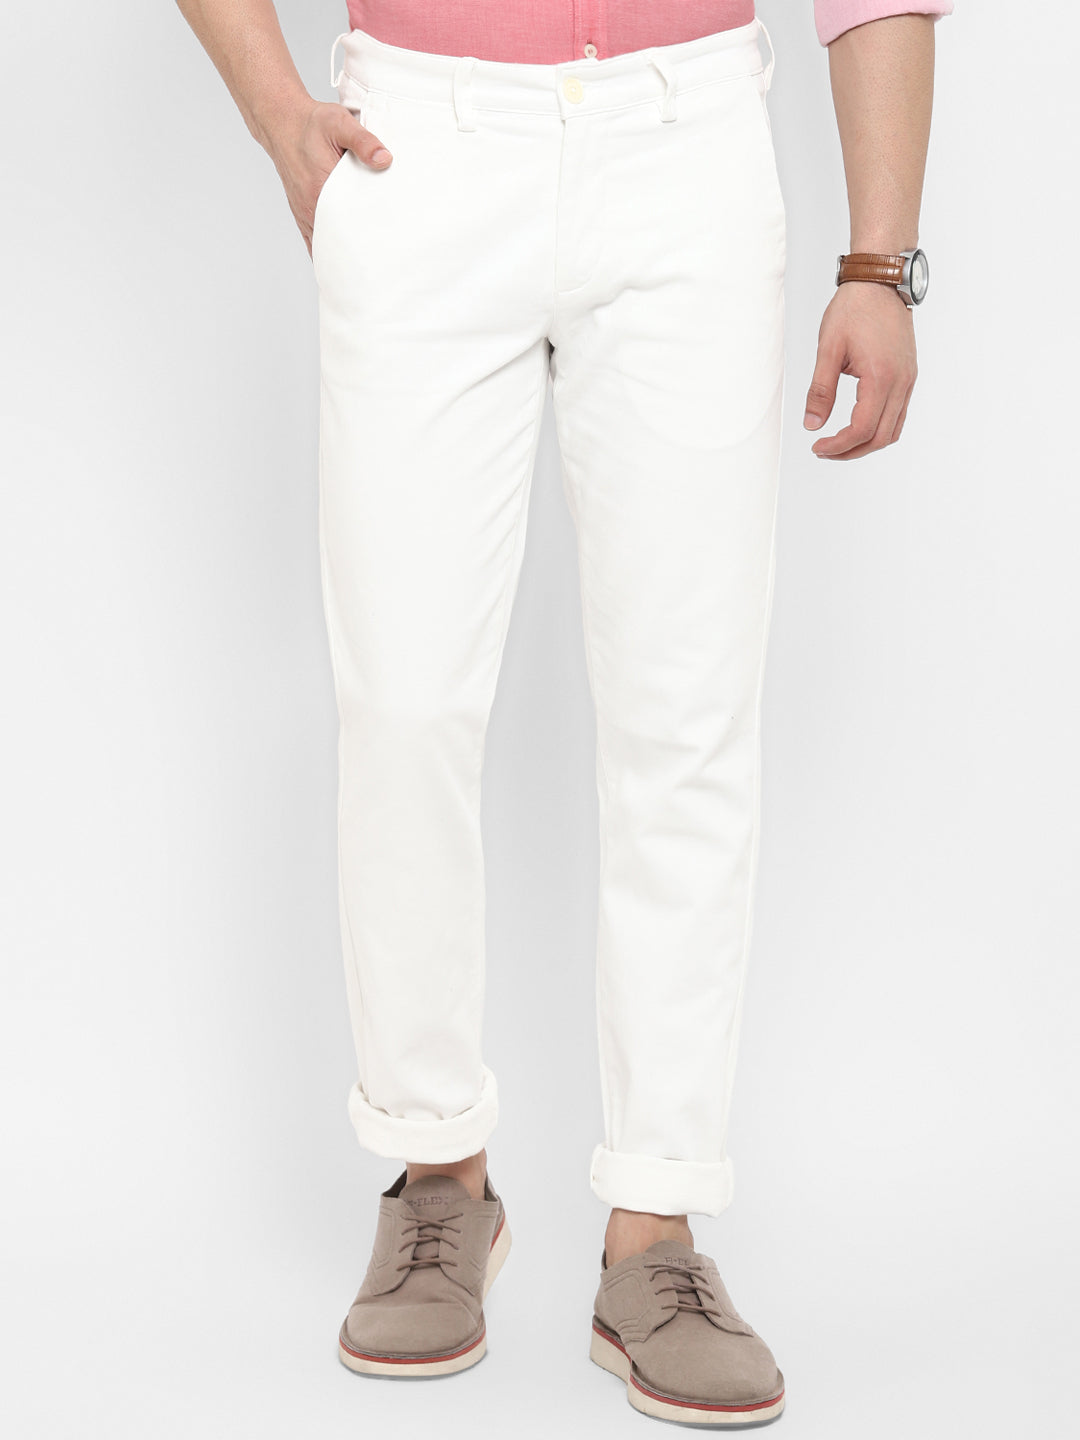 Cotton Stretch Off White Self Design Ultra Slim Fit Flat Front Casual Trouser